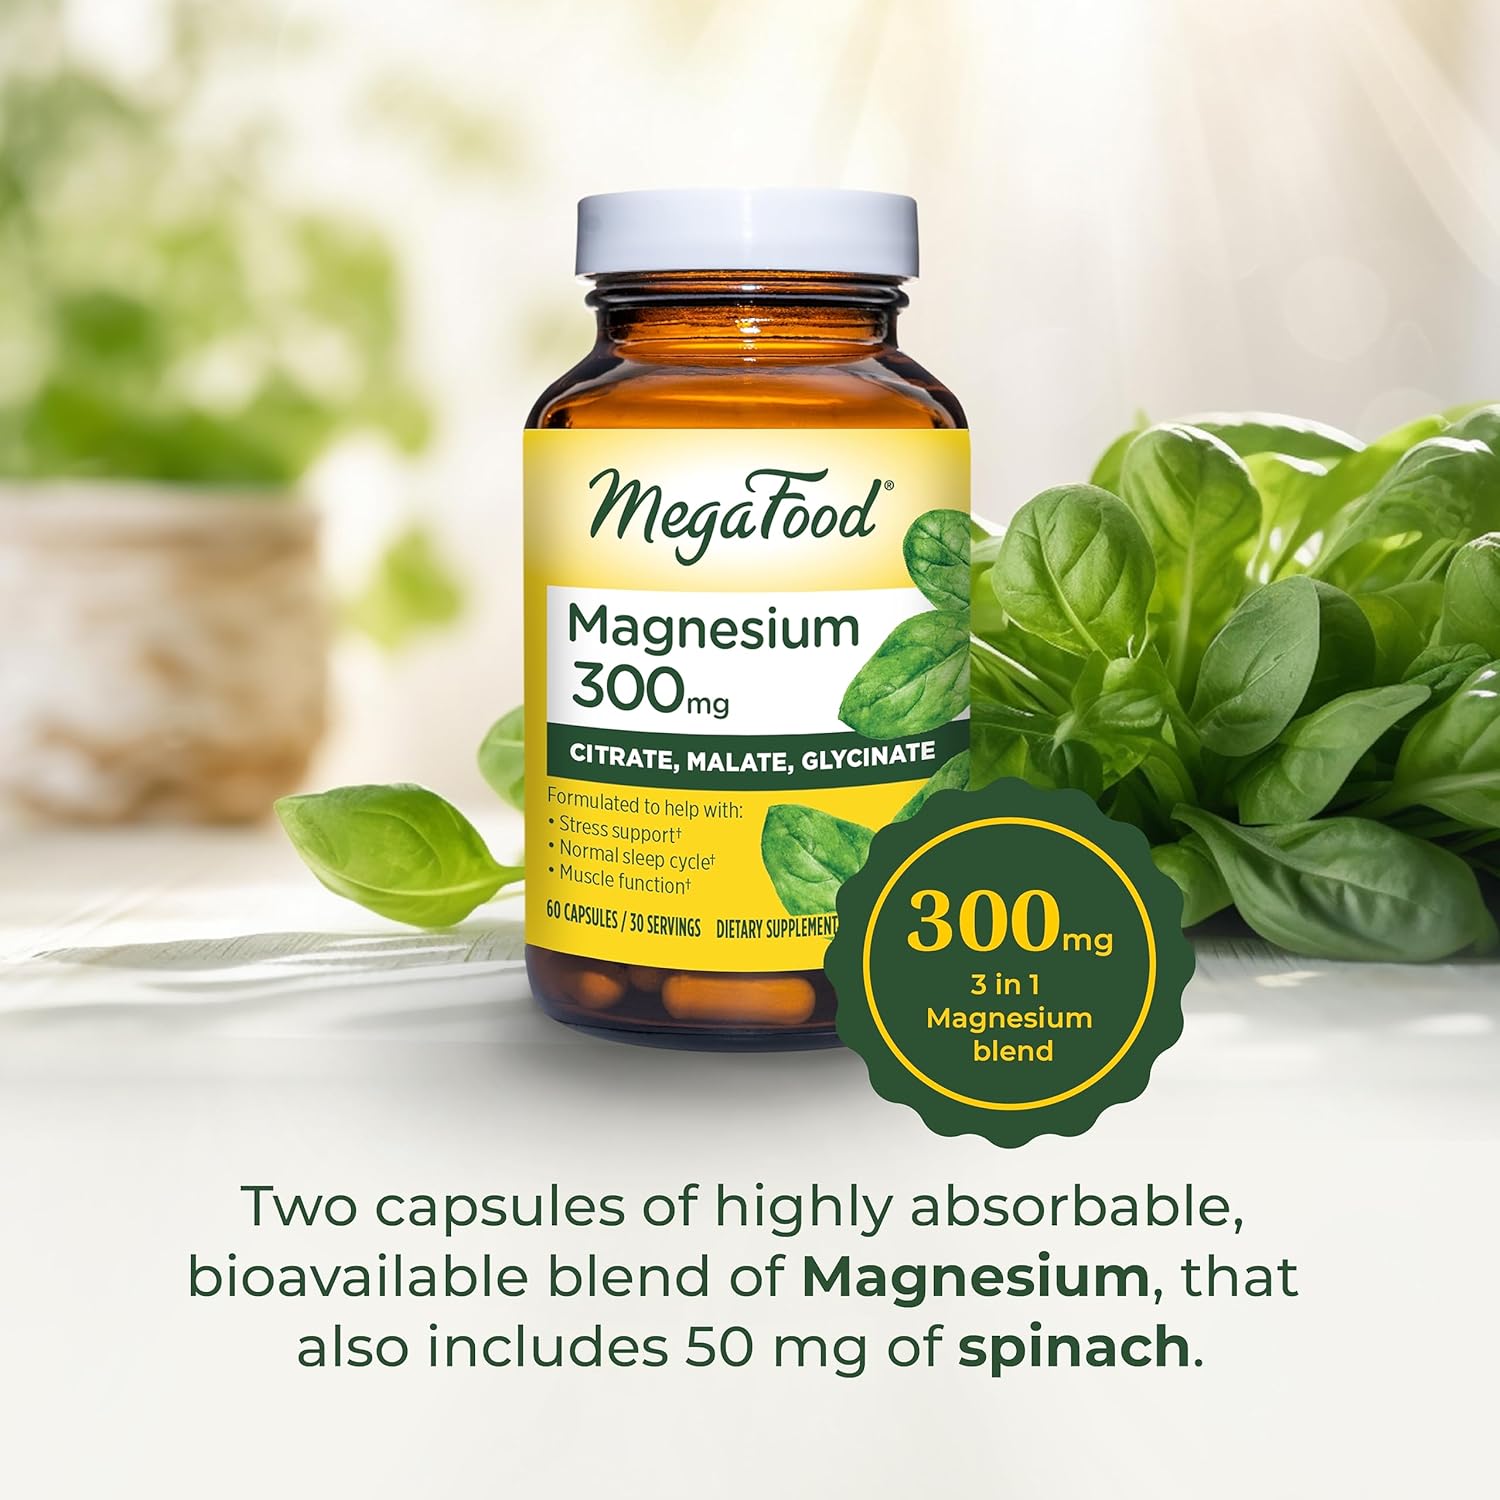 MegaFood Magnesium 300 mg - Highly absorbable Blend of Magnesium Glyci